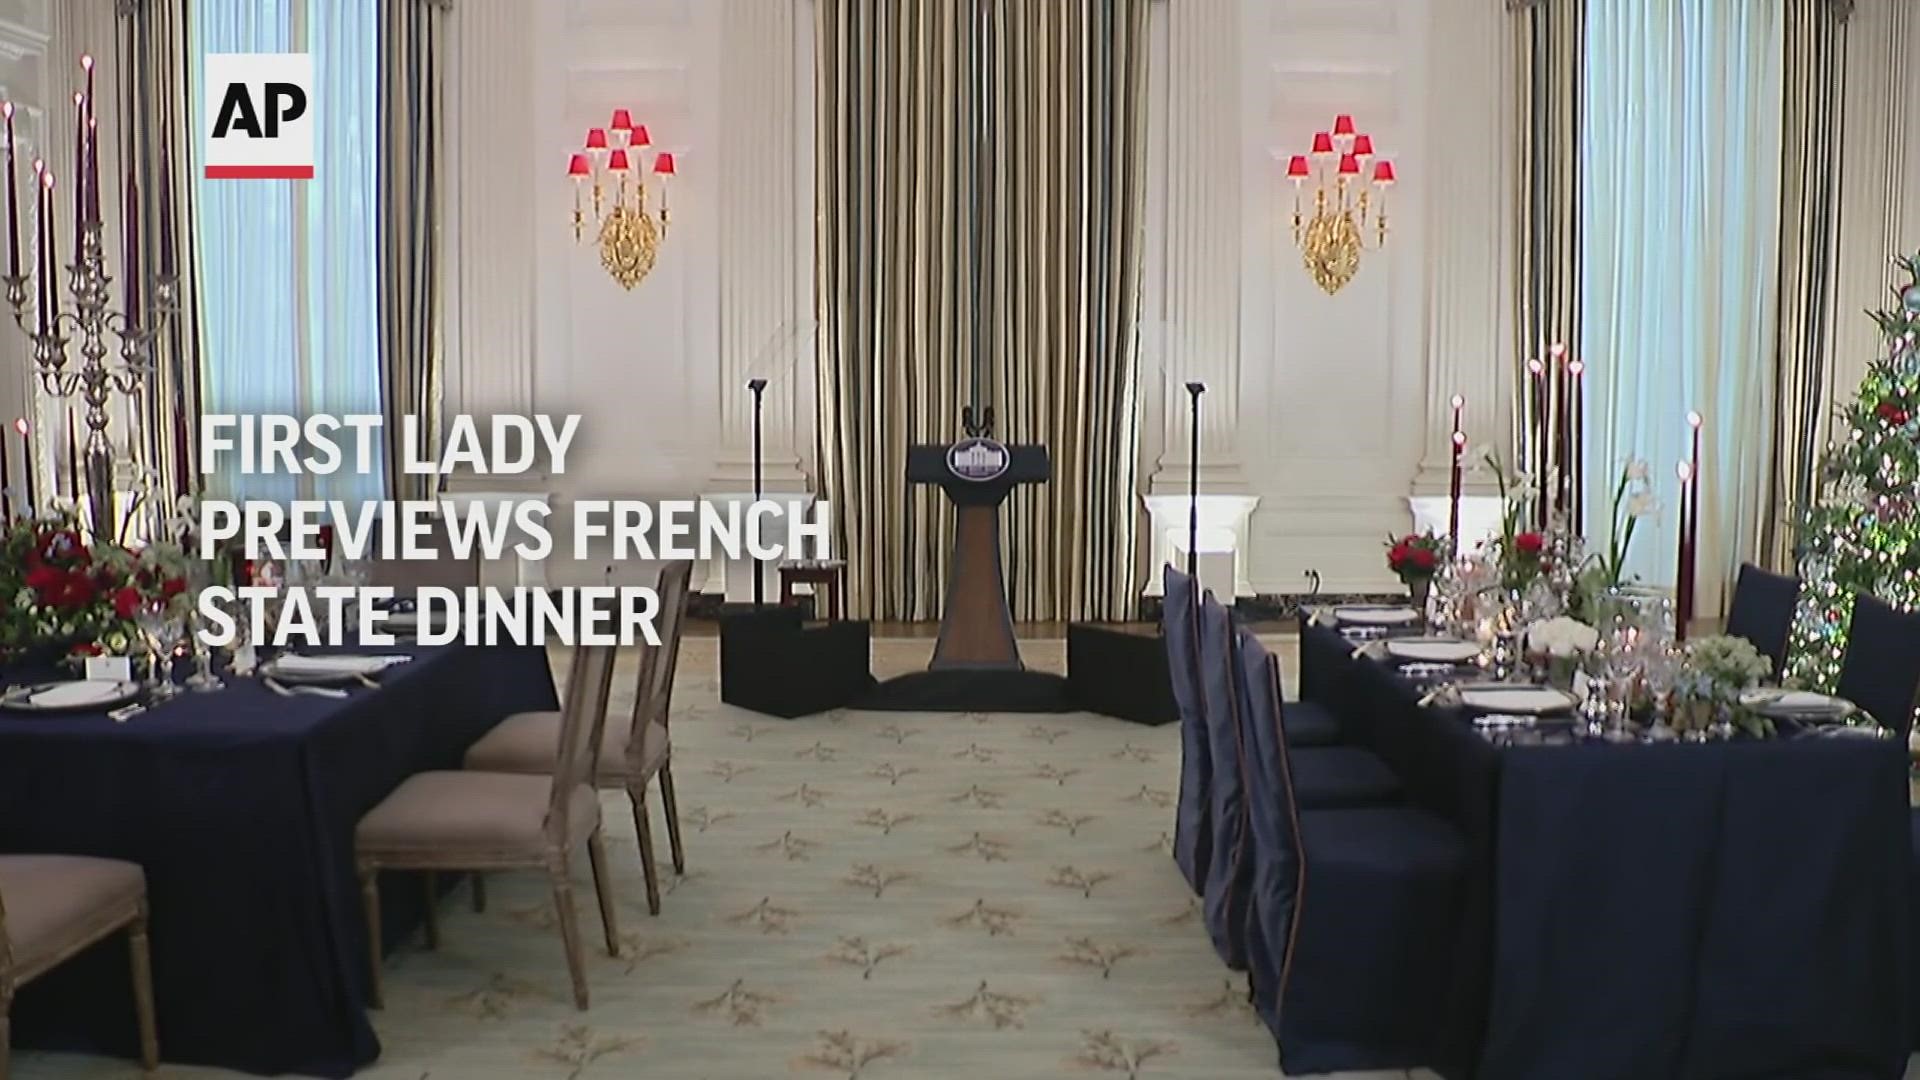 The White House says Thursday's state dinner for the president of France is meant to highlight the ties that bind the United States and its oldest ally.